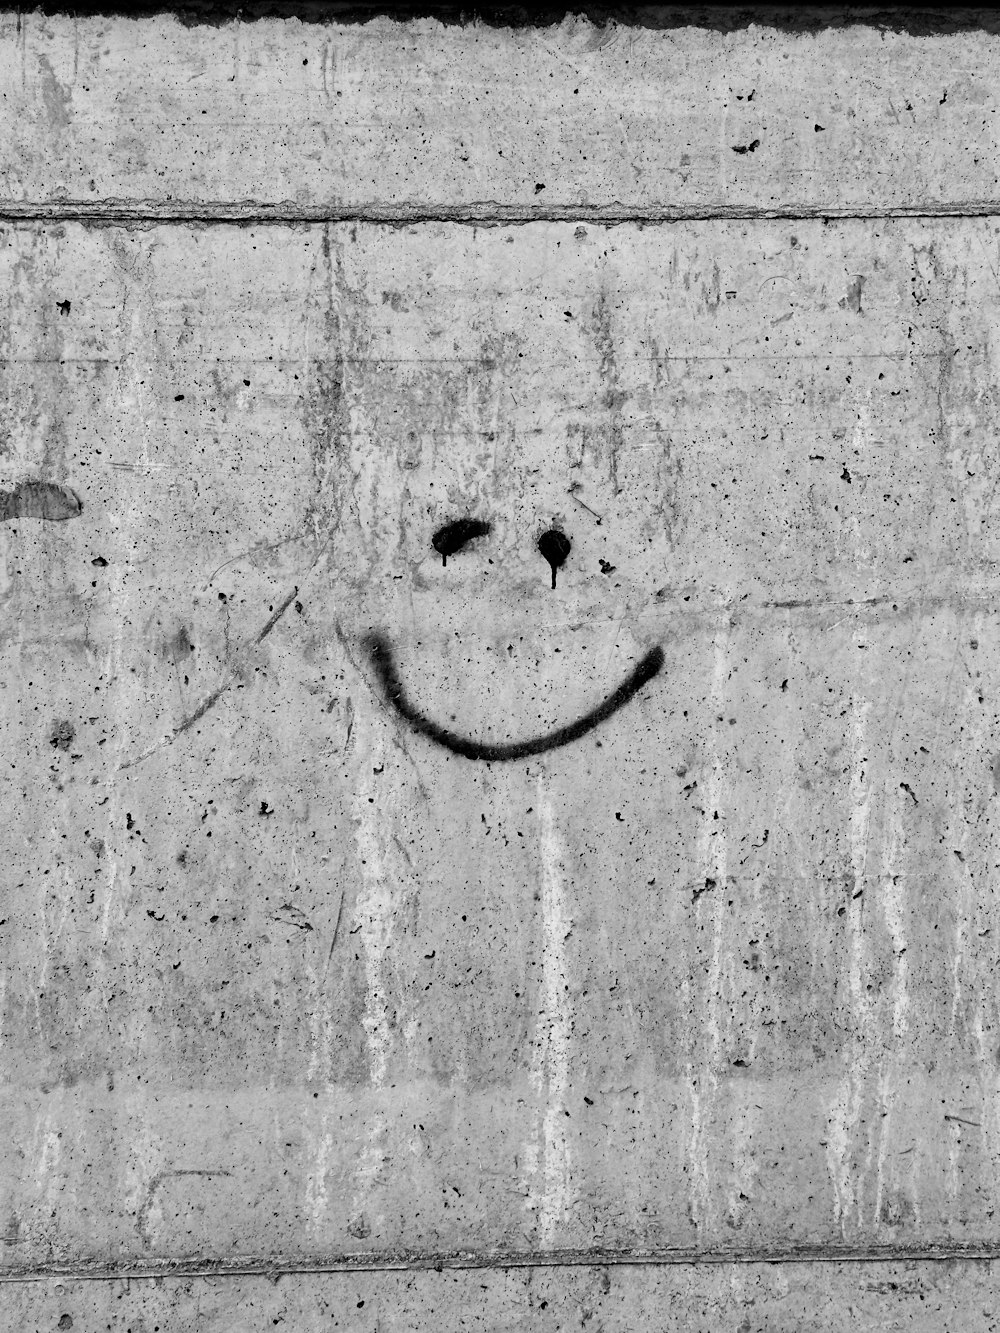 a smiley face drawn on a concrete wall